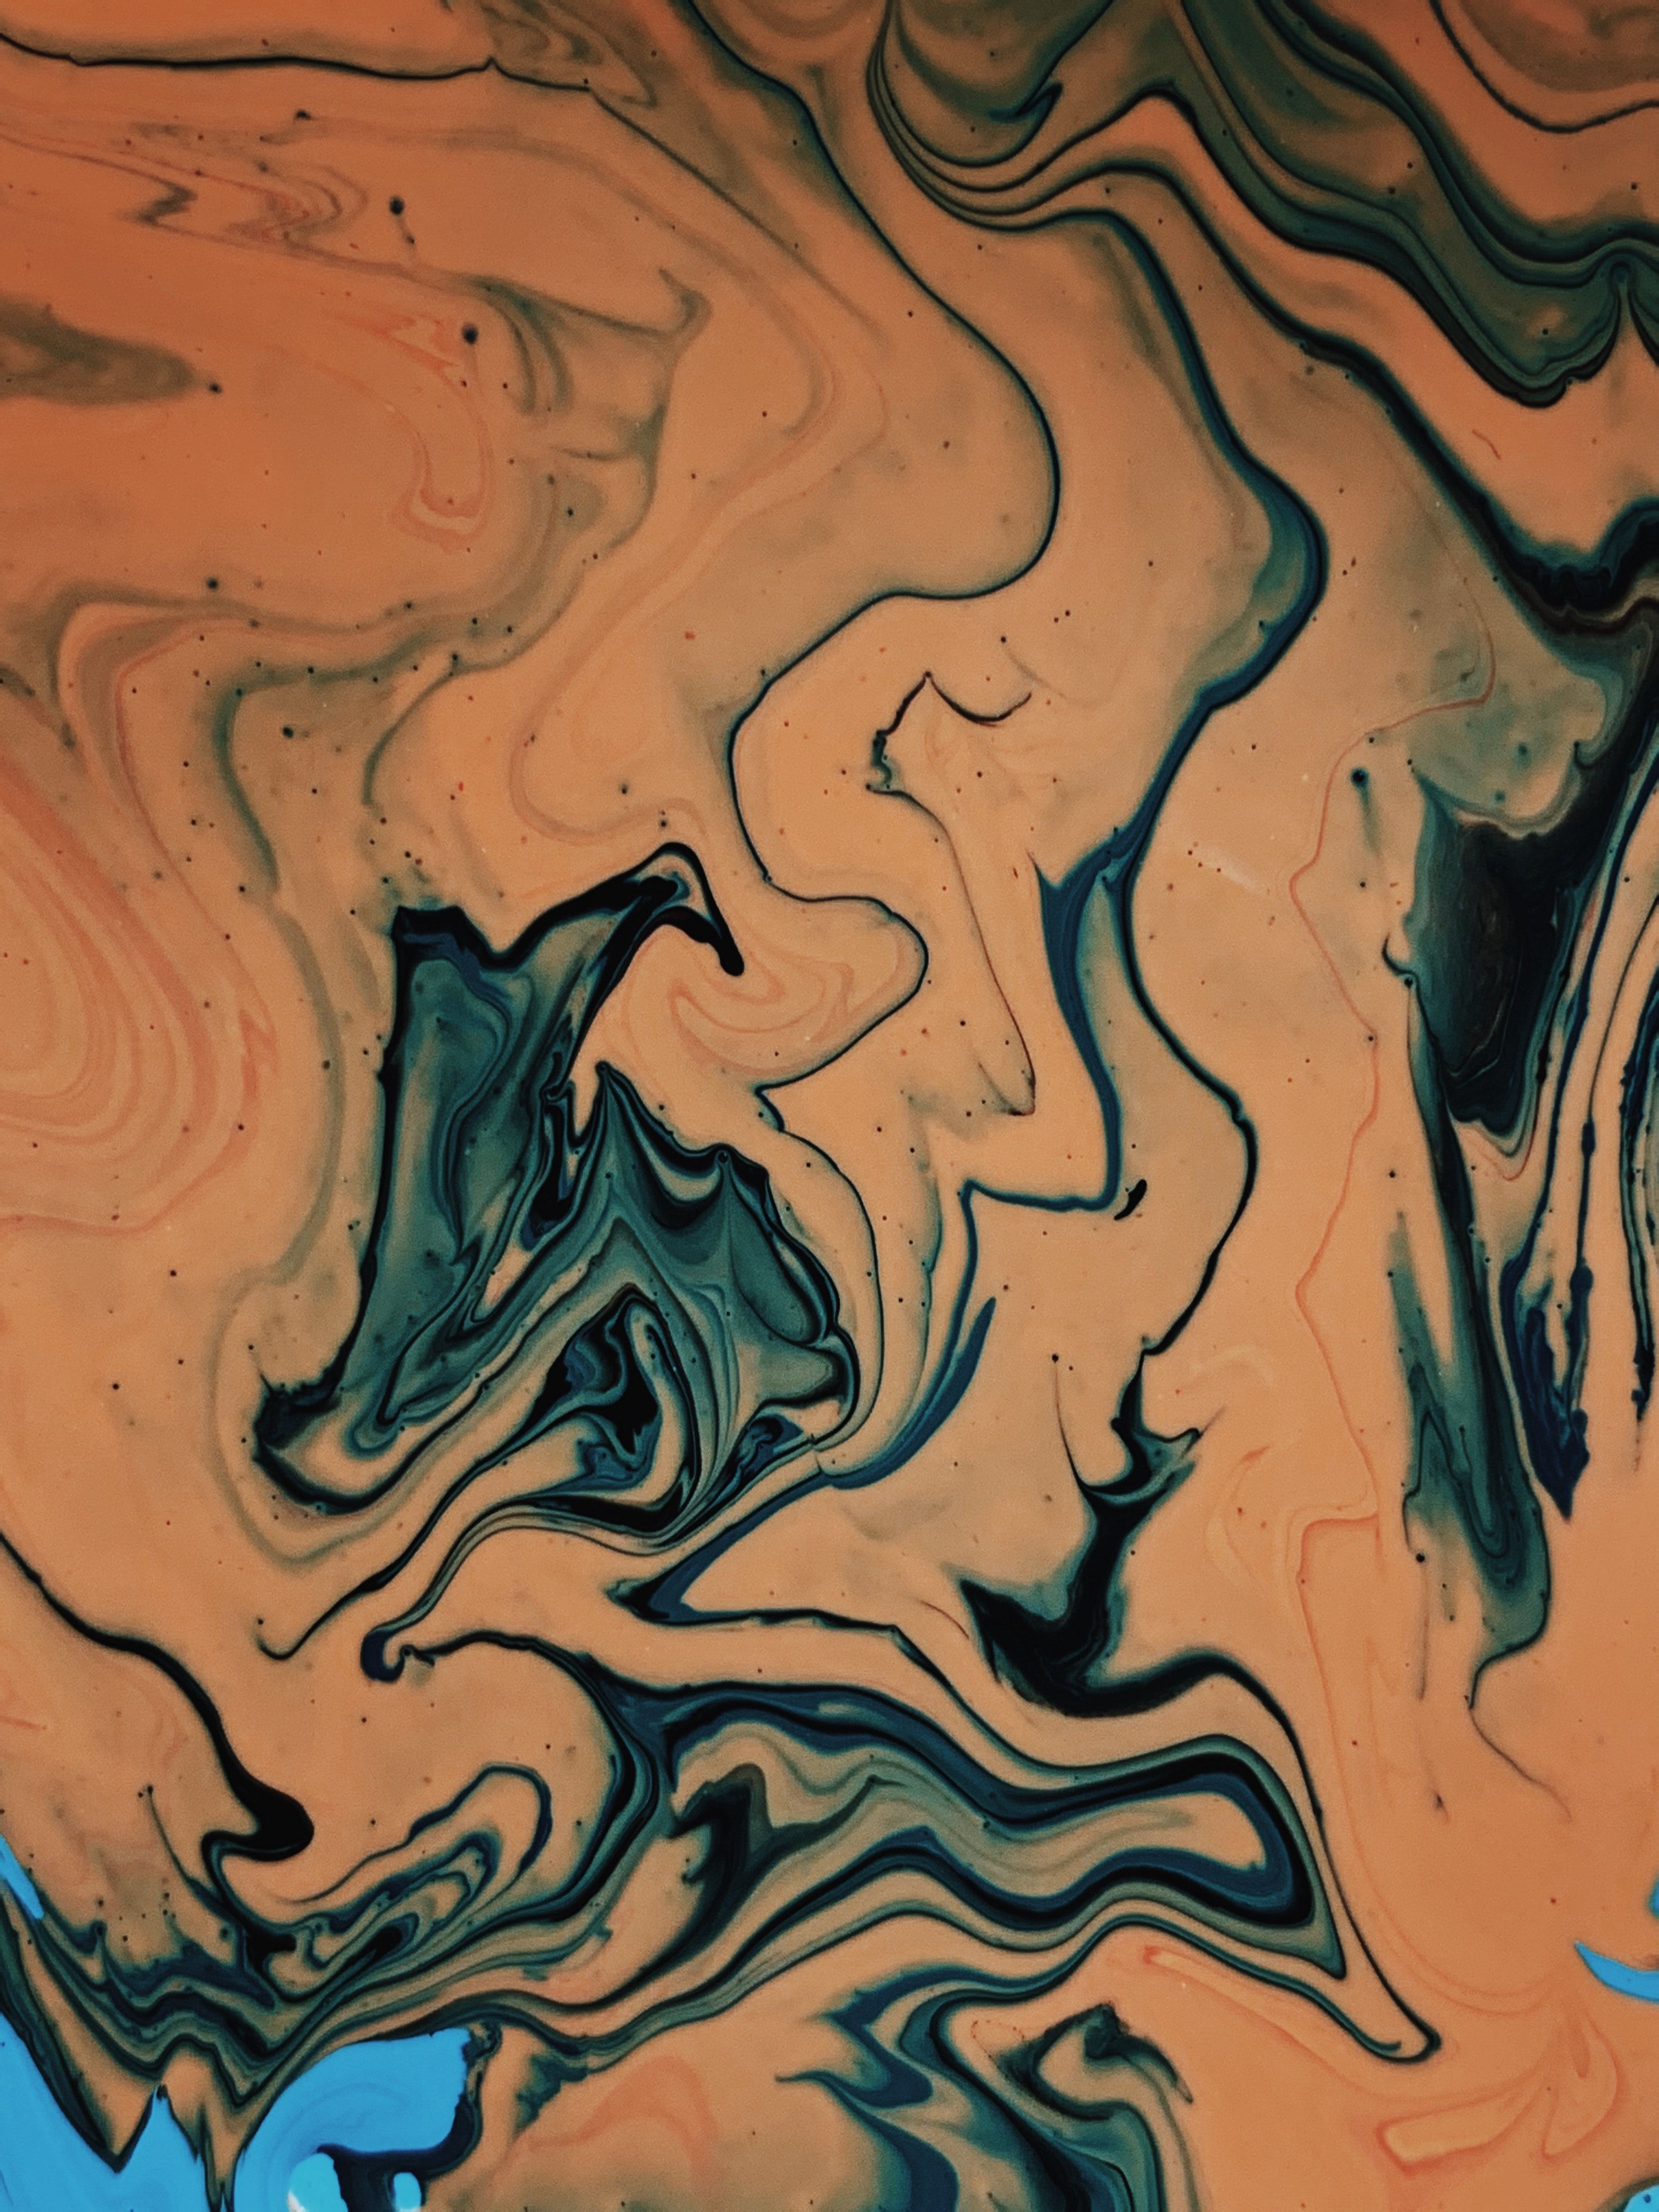 A close up of an orange and blue liquid - Brown